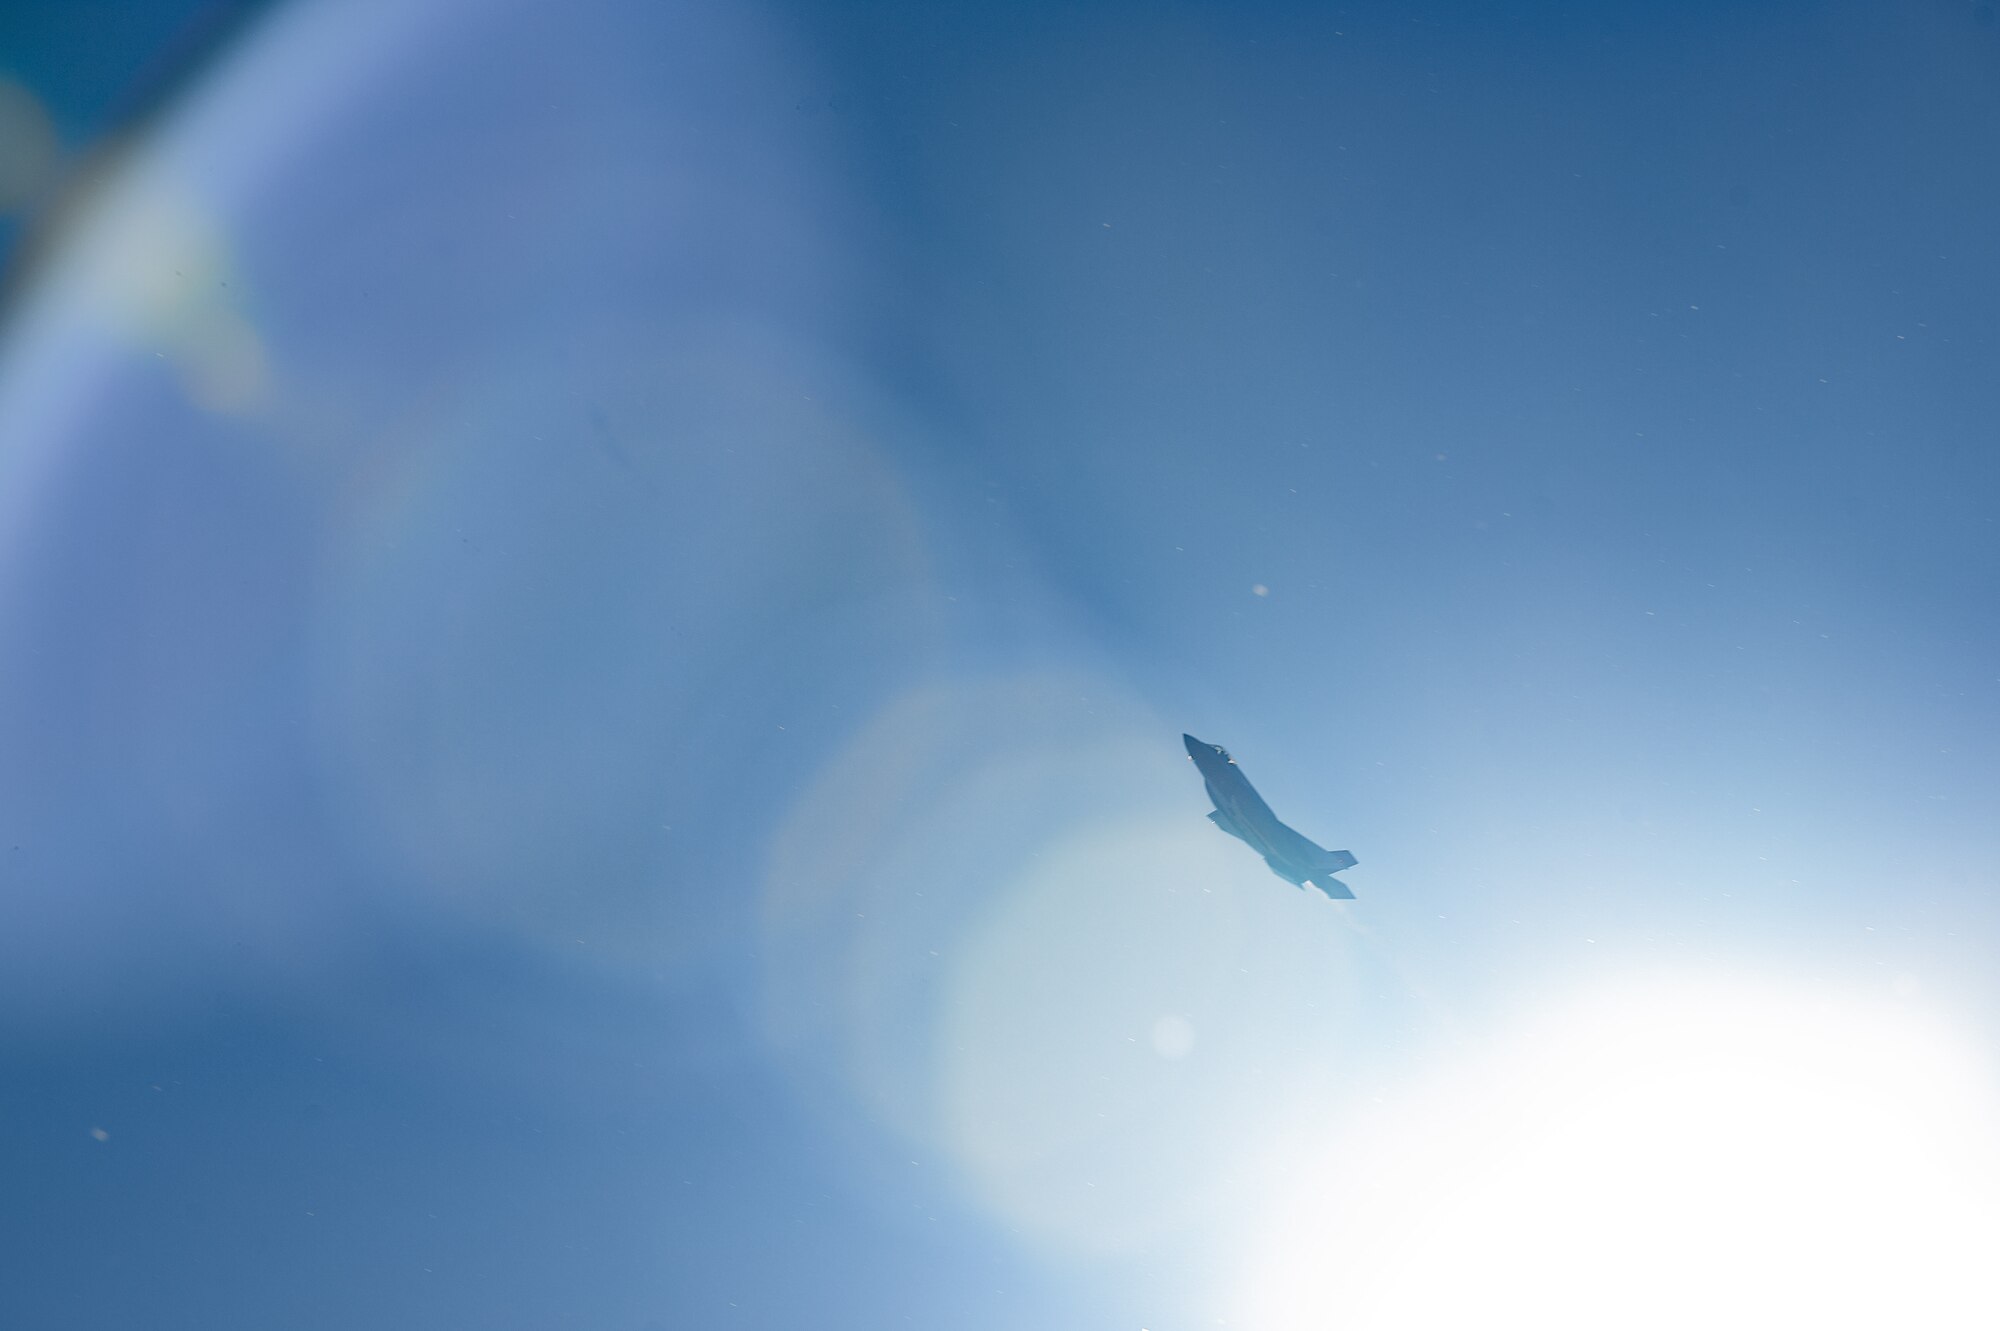 An F-35A Lightning II assigned to the 354th Fighter Wing (FW) flies over Eielson Air Force Base, Alaska, during an Agile Combat Employment (ACE) exercise July 12, 2021. The 354th FW applied ACE concepts to become more agile in mission execution, strategic deterrence, and more capable in generating an increased number of sorties with a minimal footprint from a simulated austere environment. (U.S. Air Force photo by Airman 1st Class Jose Miguel T. Tamondong)